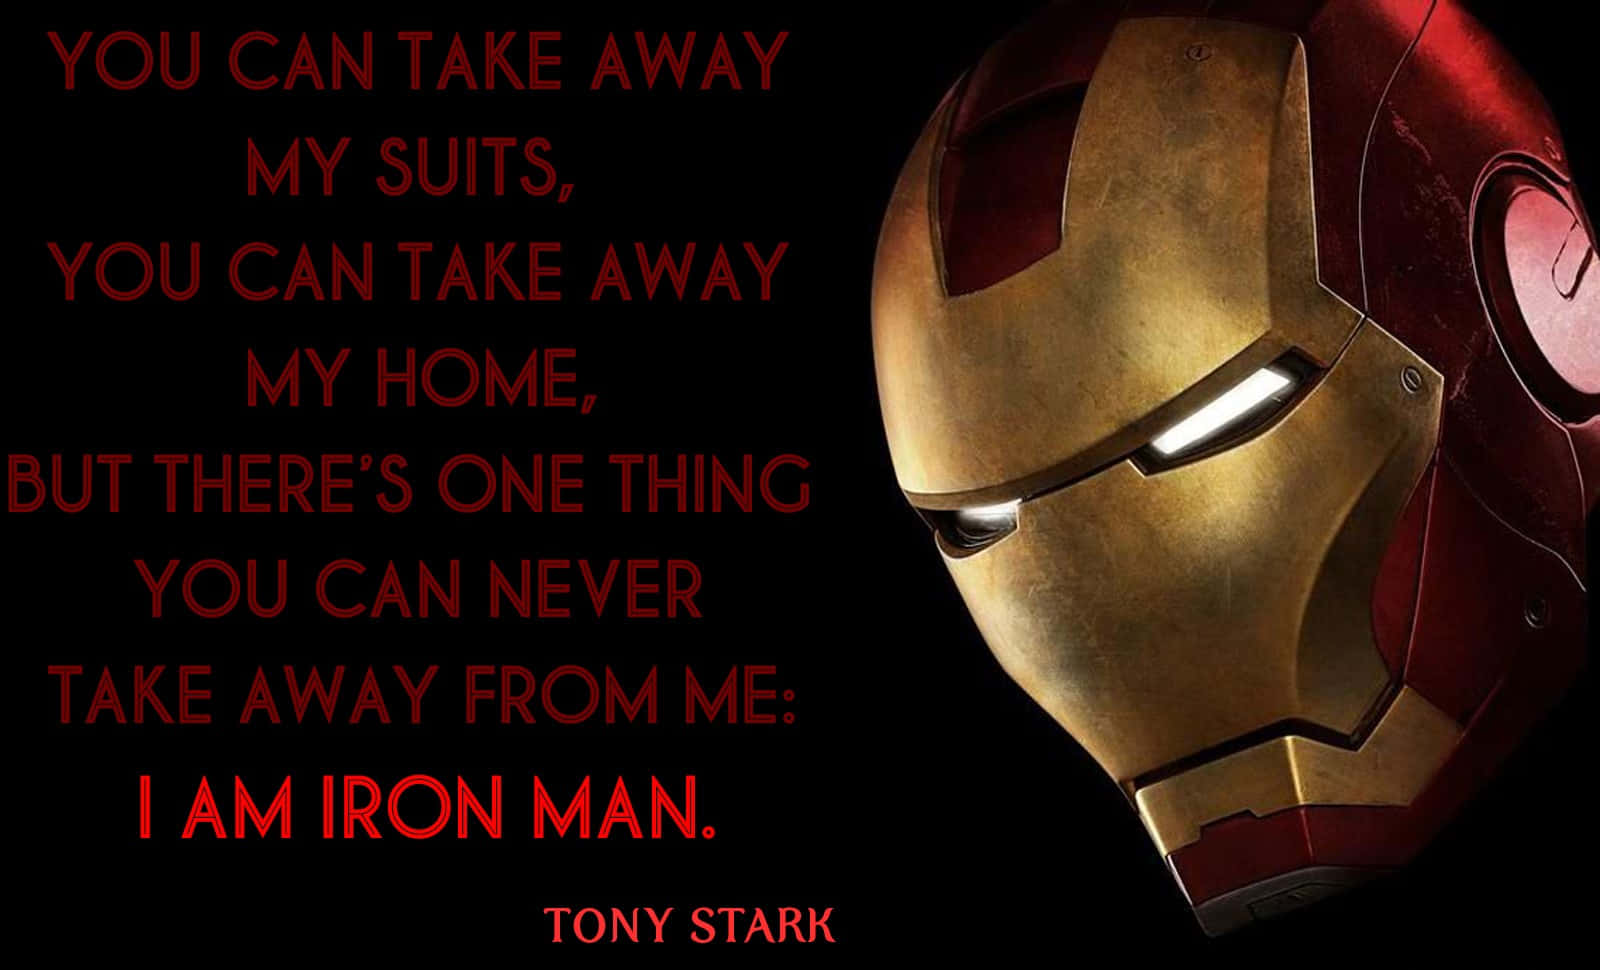 "To be a hero, one need not be fearless, but courageous." - Iron Man Wallpaper